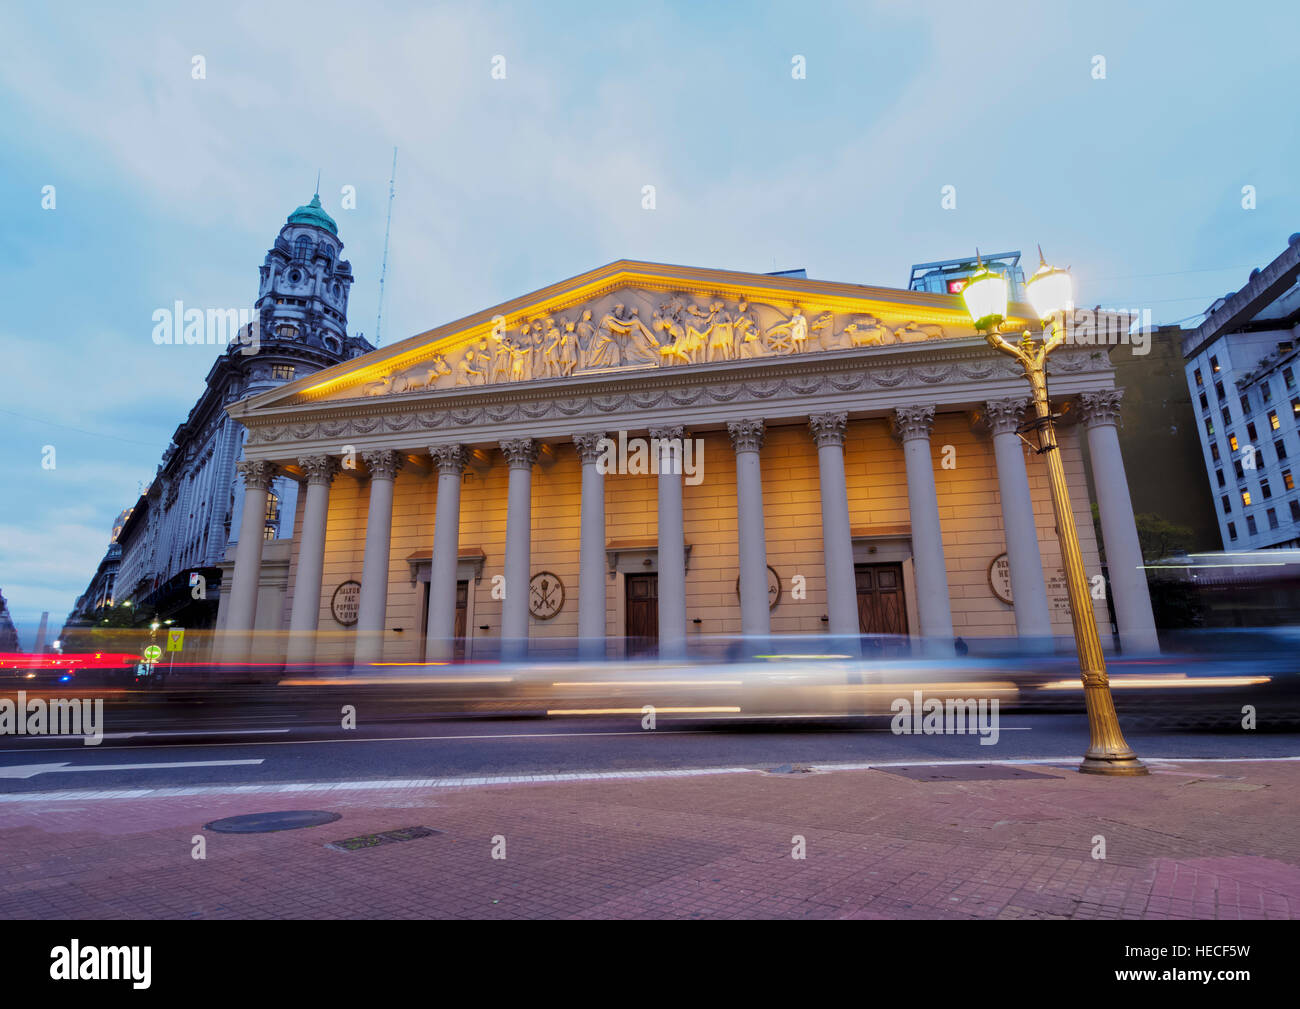 Argentina, Buenos Aires Province, City of Buenos Aires, Monserrat, Twilight view of the Metropolitan Cathedral on Plaza de Mayo. Stock Photo